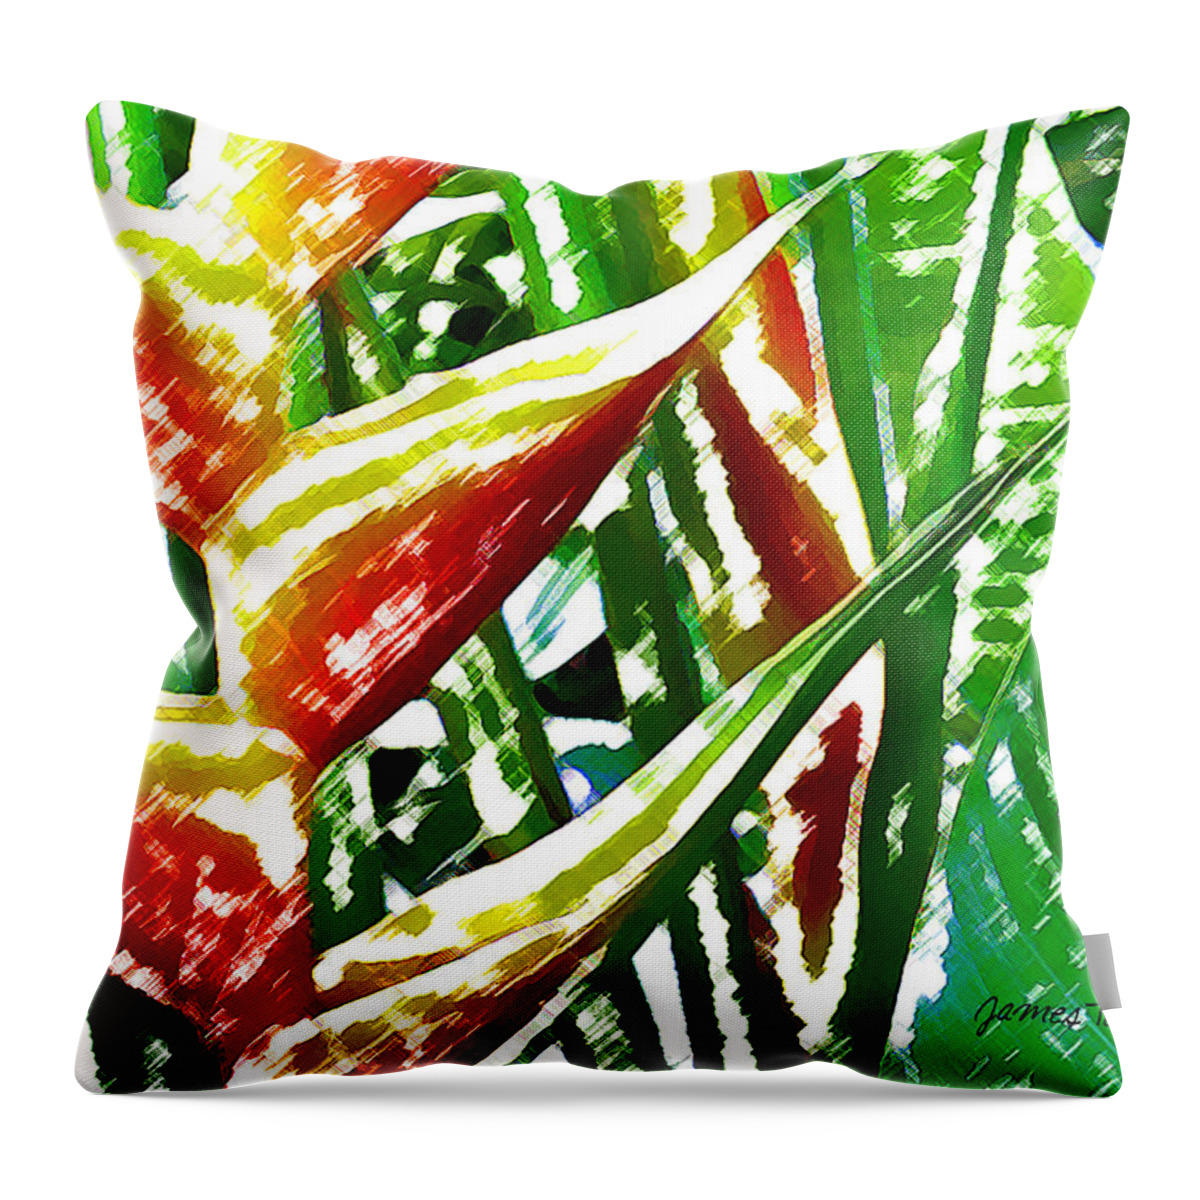 Tropical Flowers Throw Pillow featuring the digital art Heliconia by James Temple